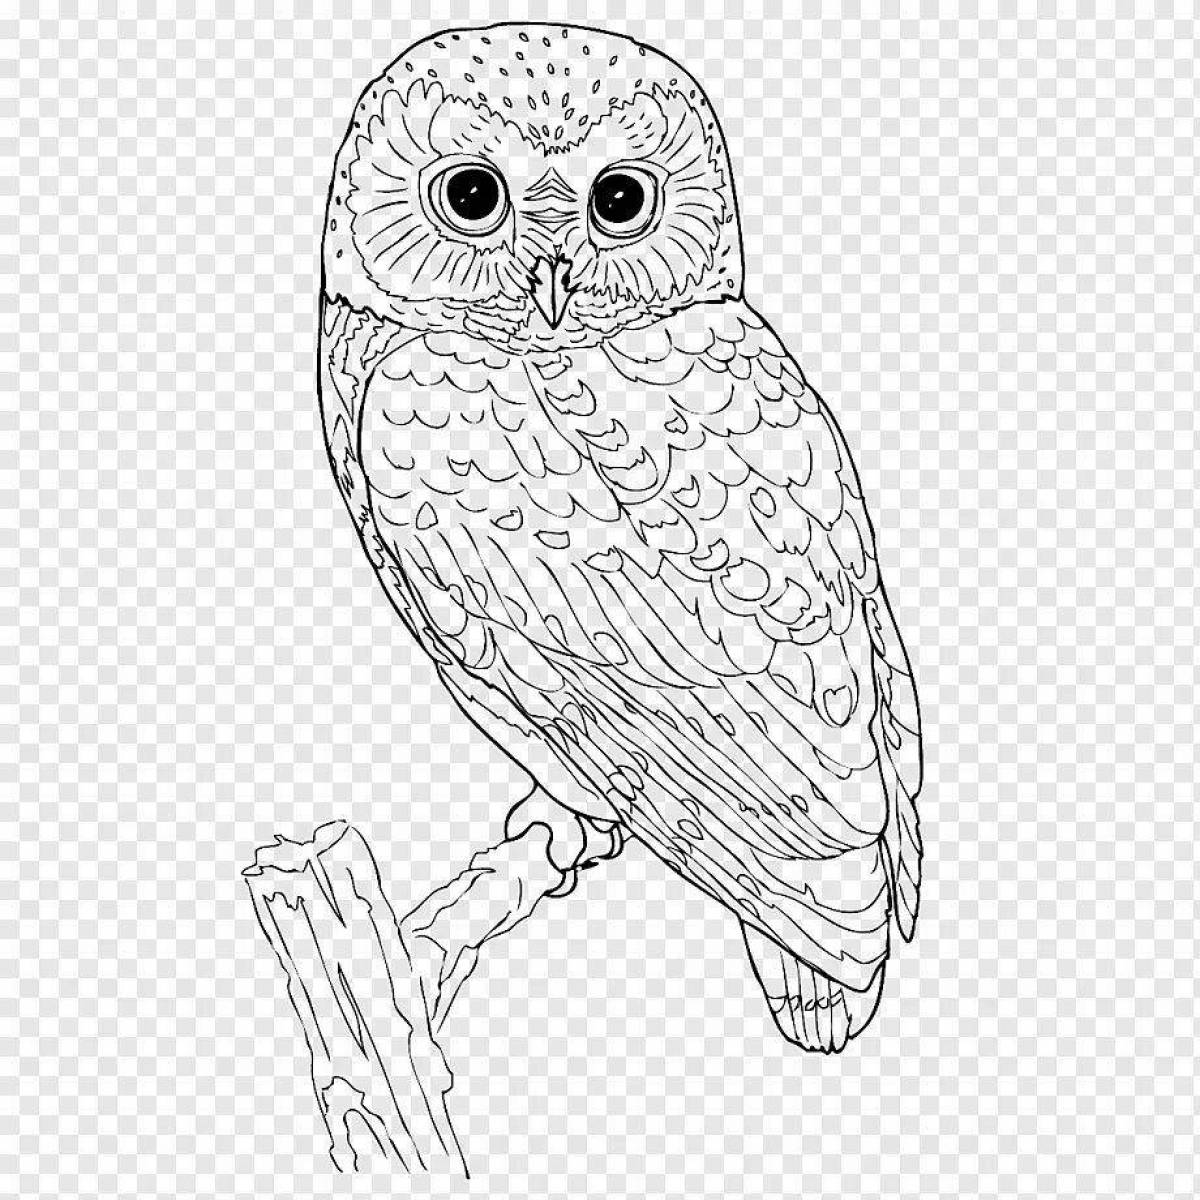 Great white owl coloring page